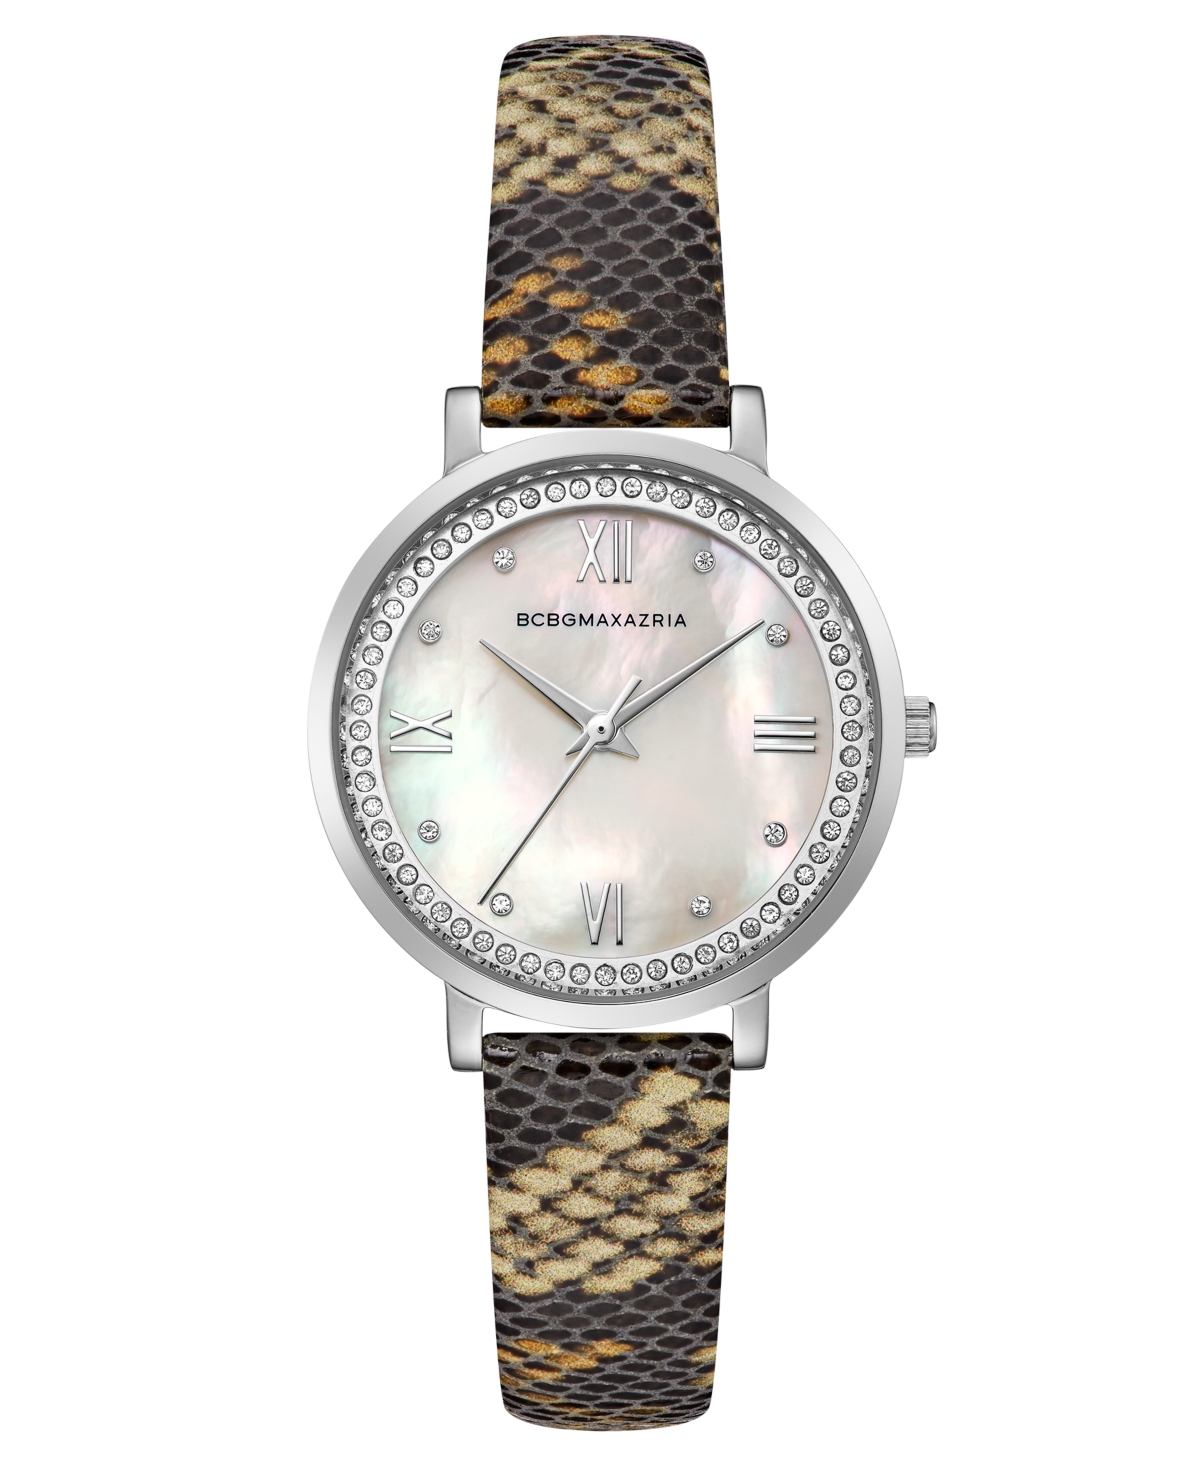 Bcbgmaxazria Ladies Printed Leather Strap Watch with Light Mop Dial, 33mm